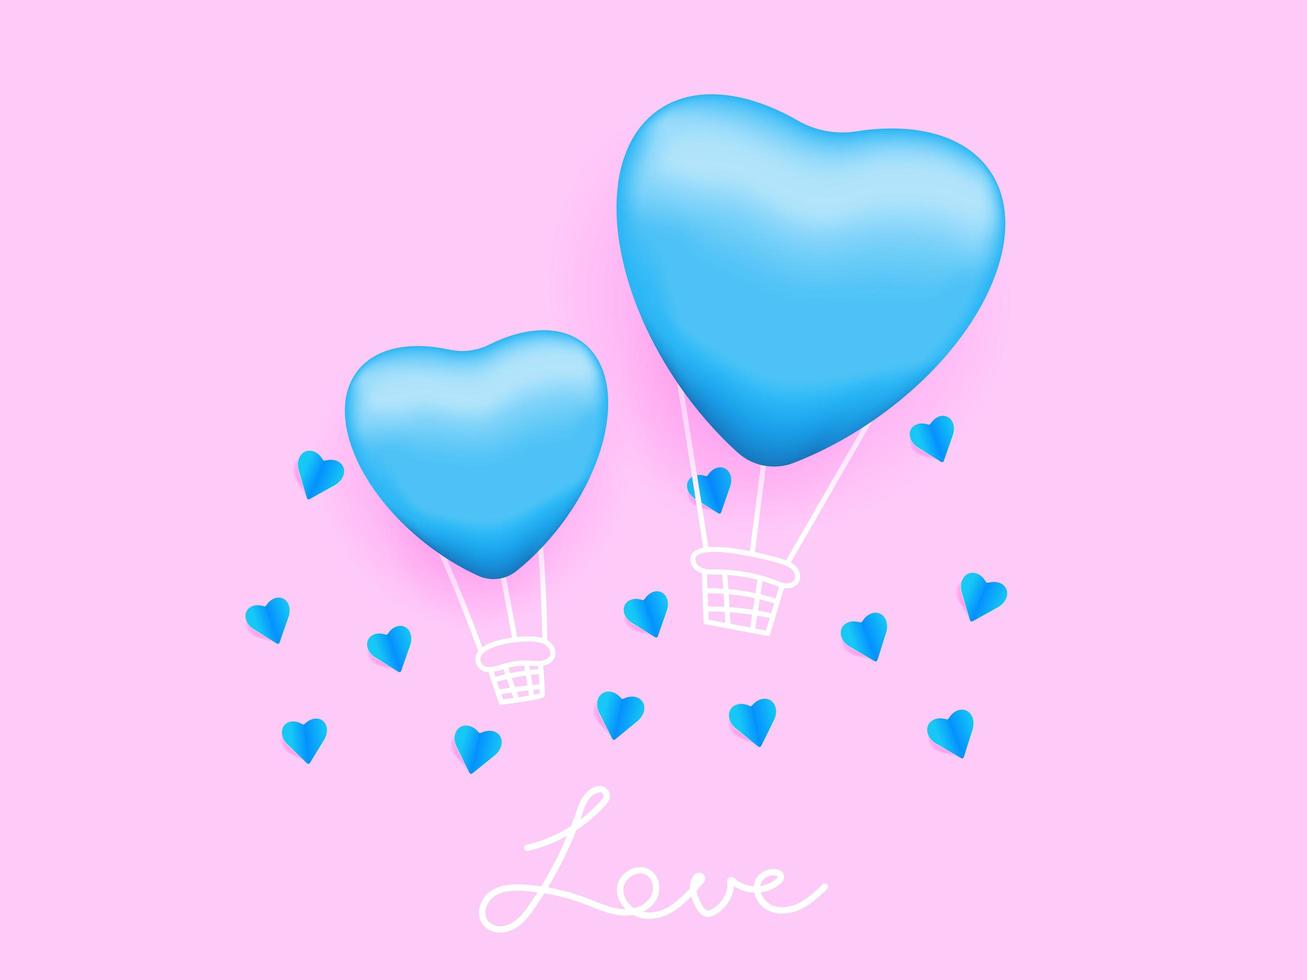 love in the air, heart shape balloon with pink background vector